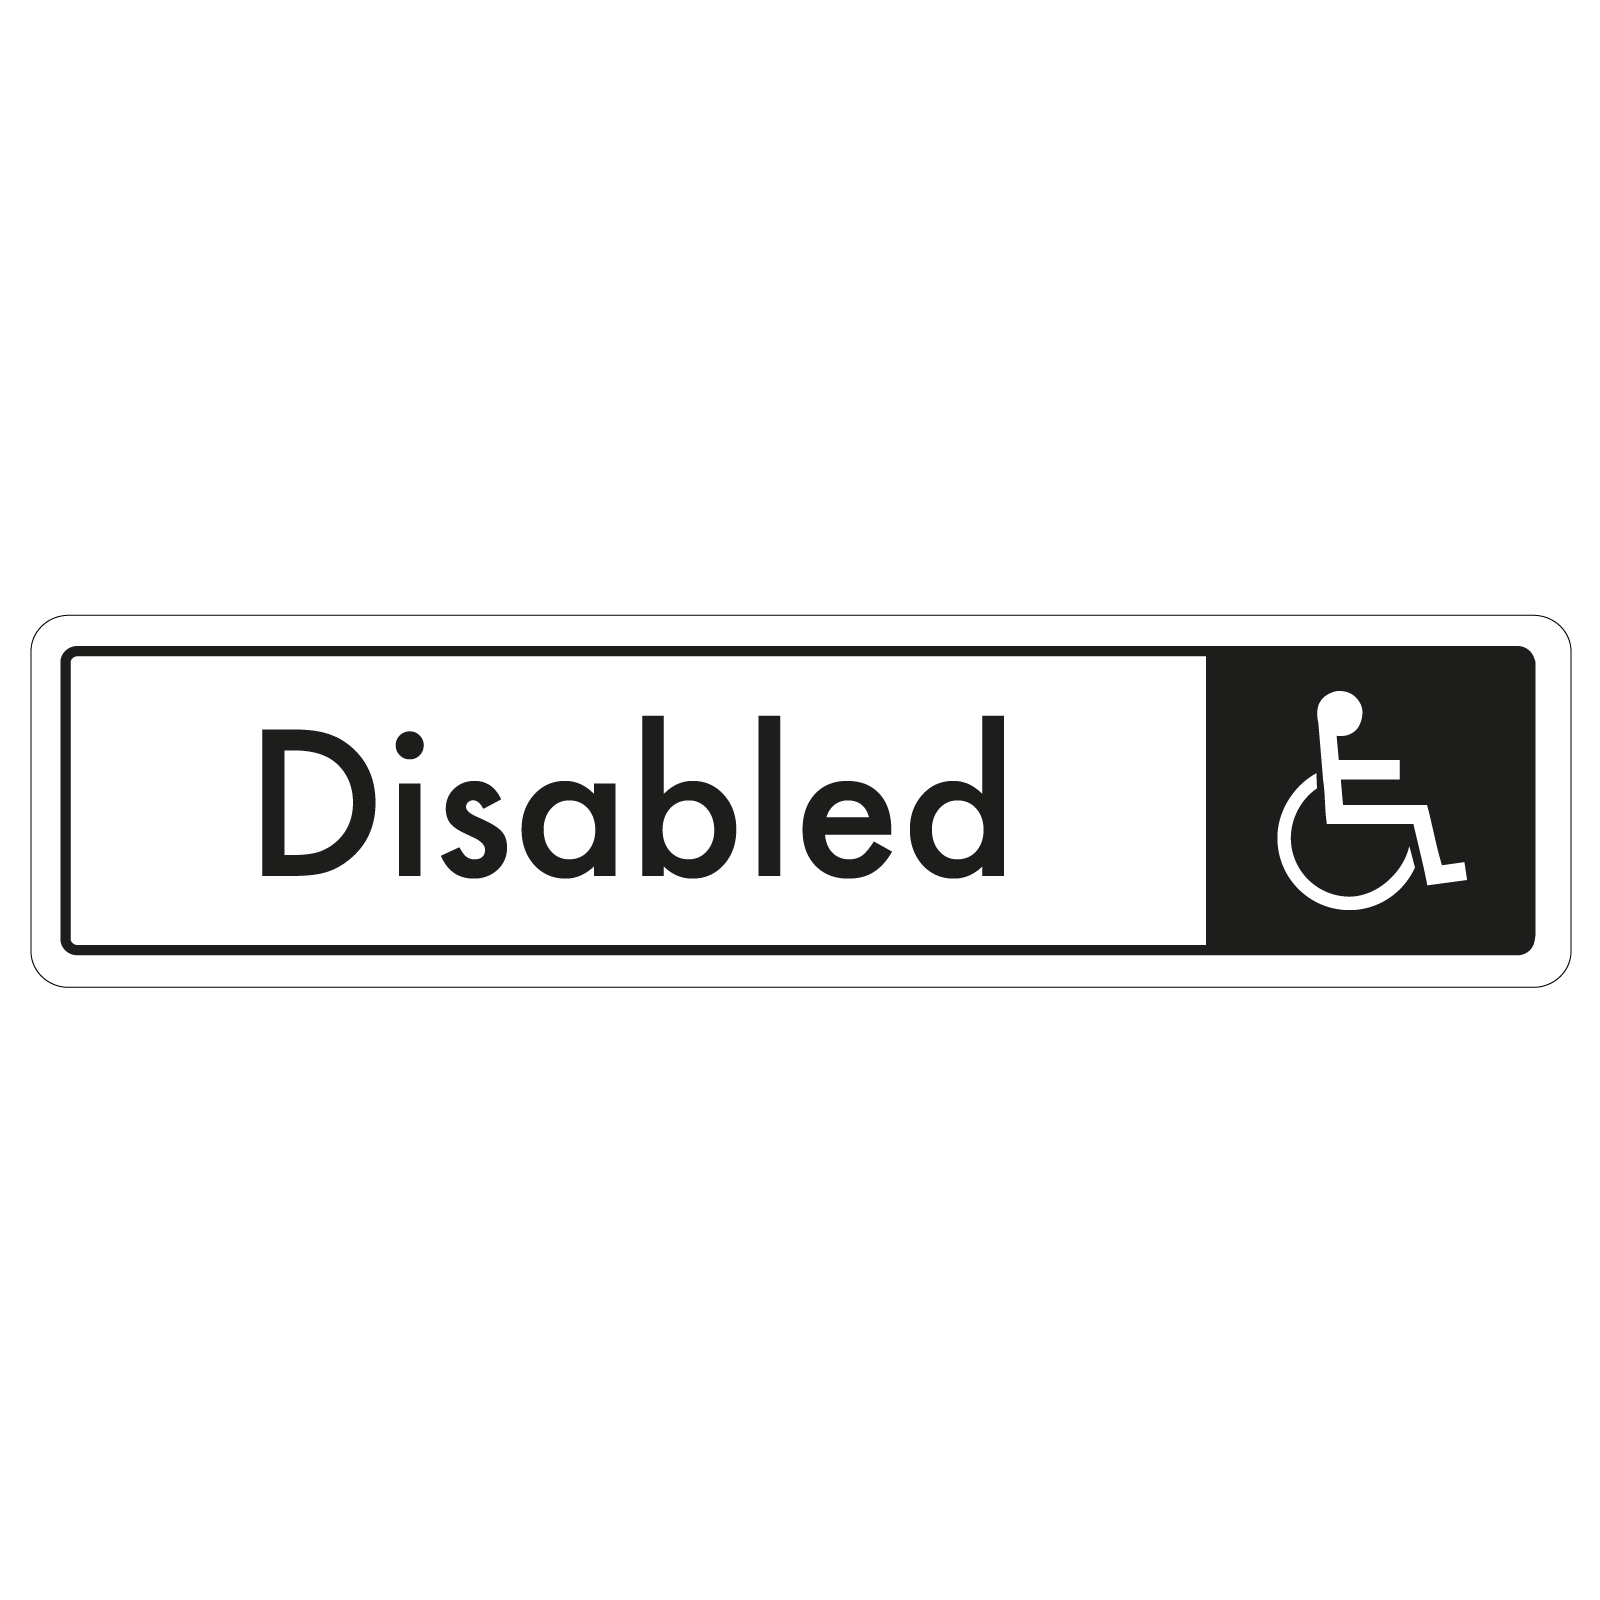 Disabled Door Sign - Black on White 